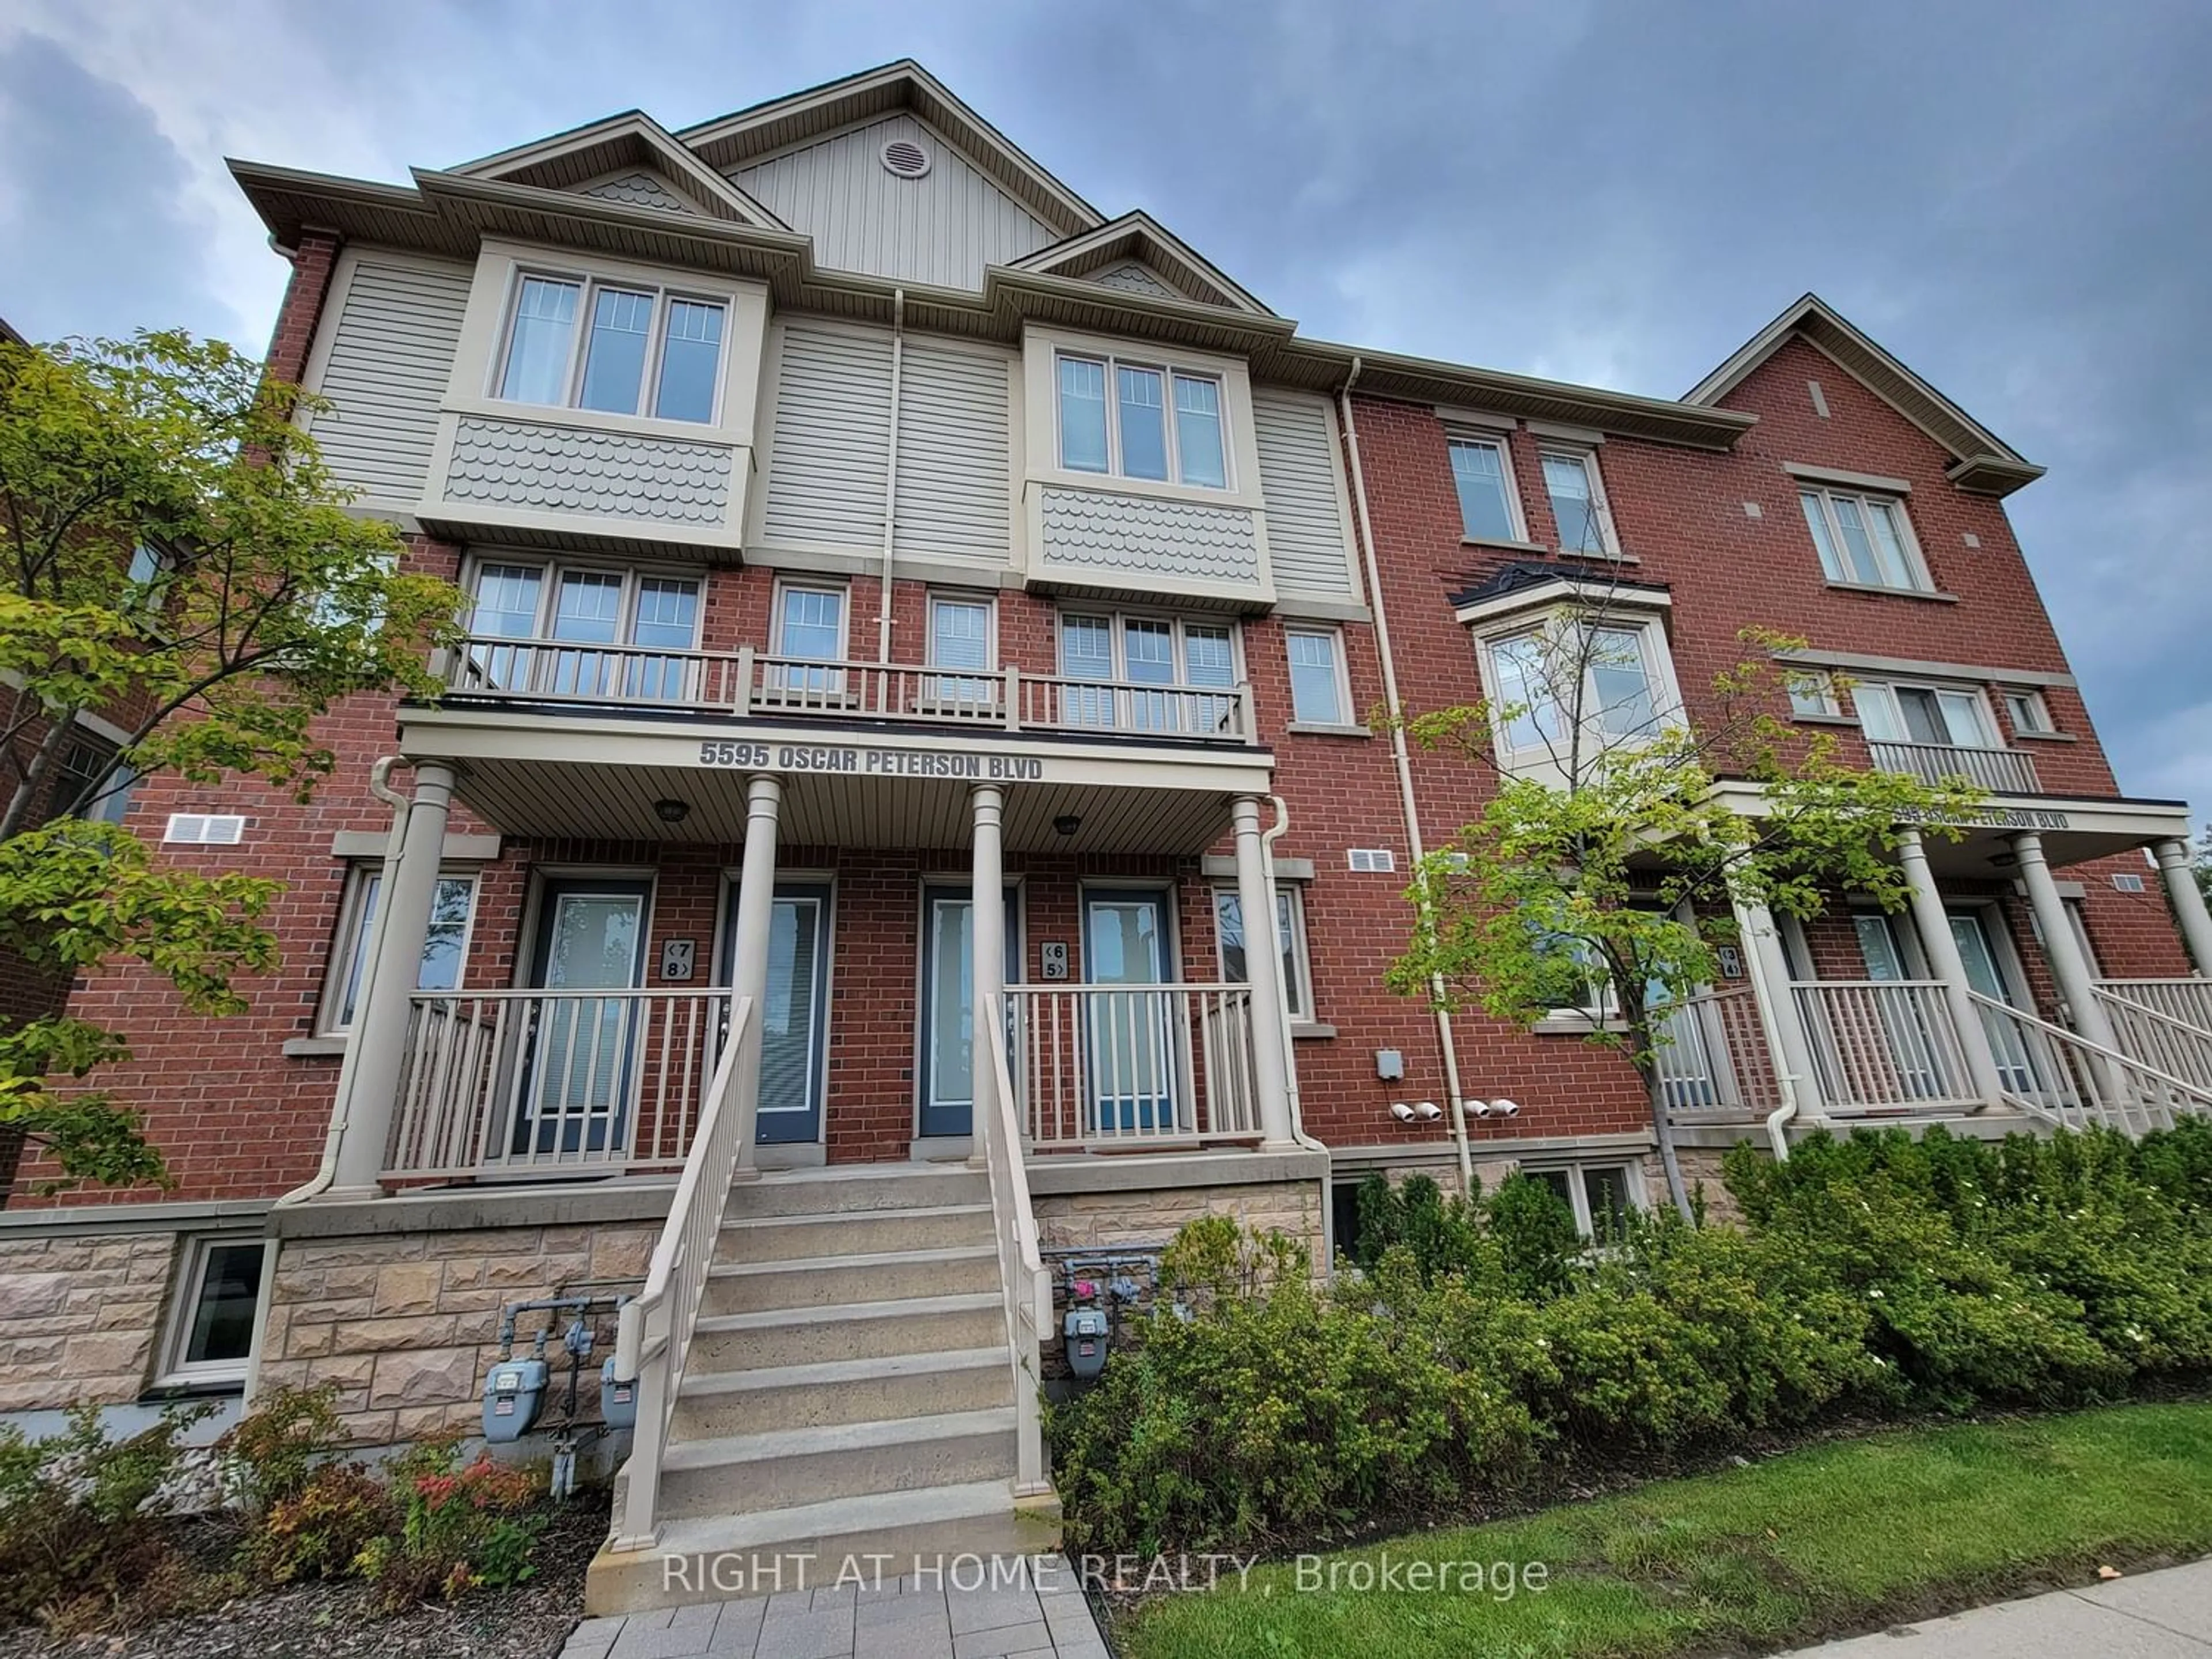 A pic from exterior of the house or condo for 5595 Oscar Peterson Blvd #5, Mississauga Ontario L5M 0T2